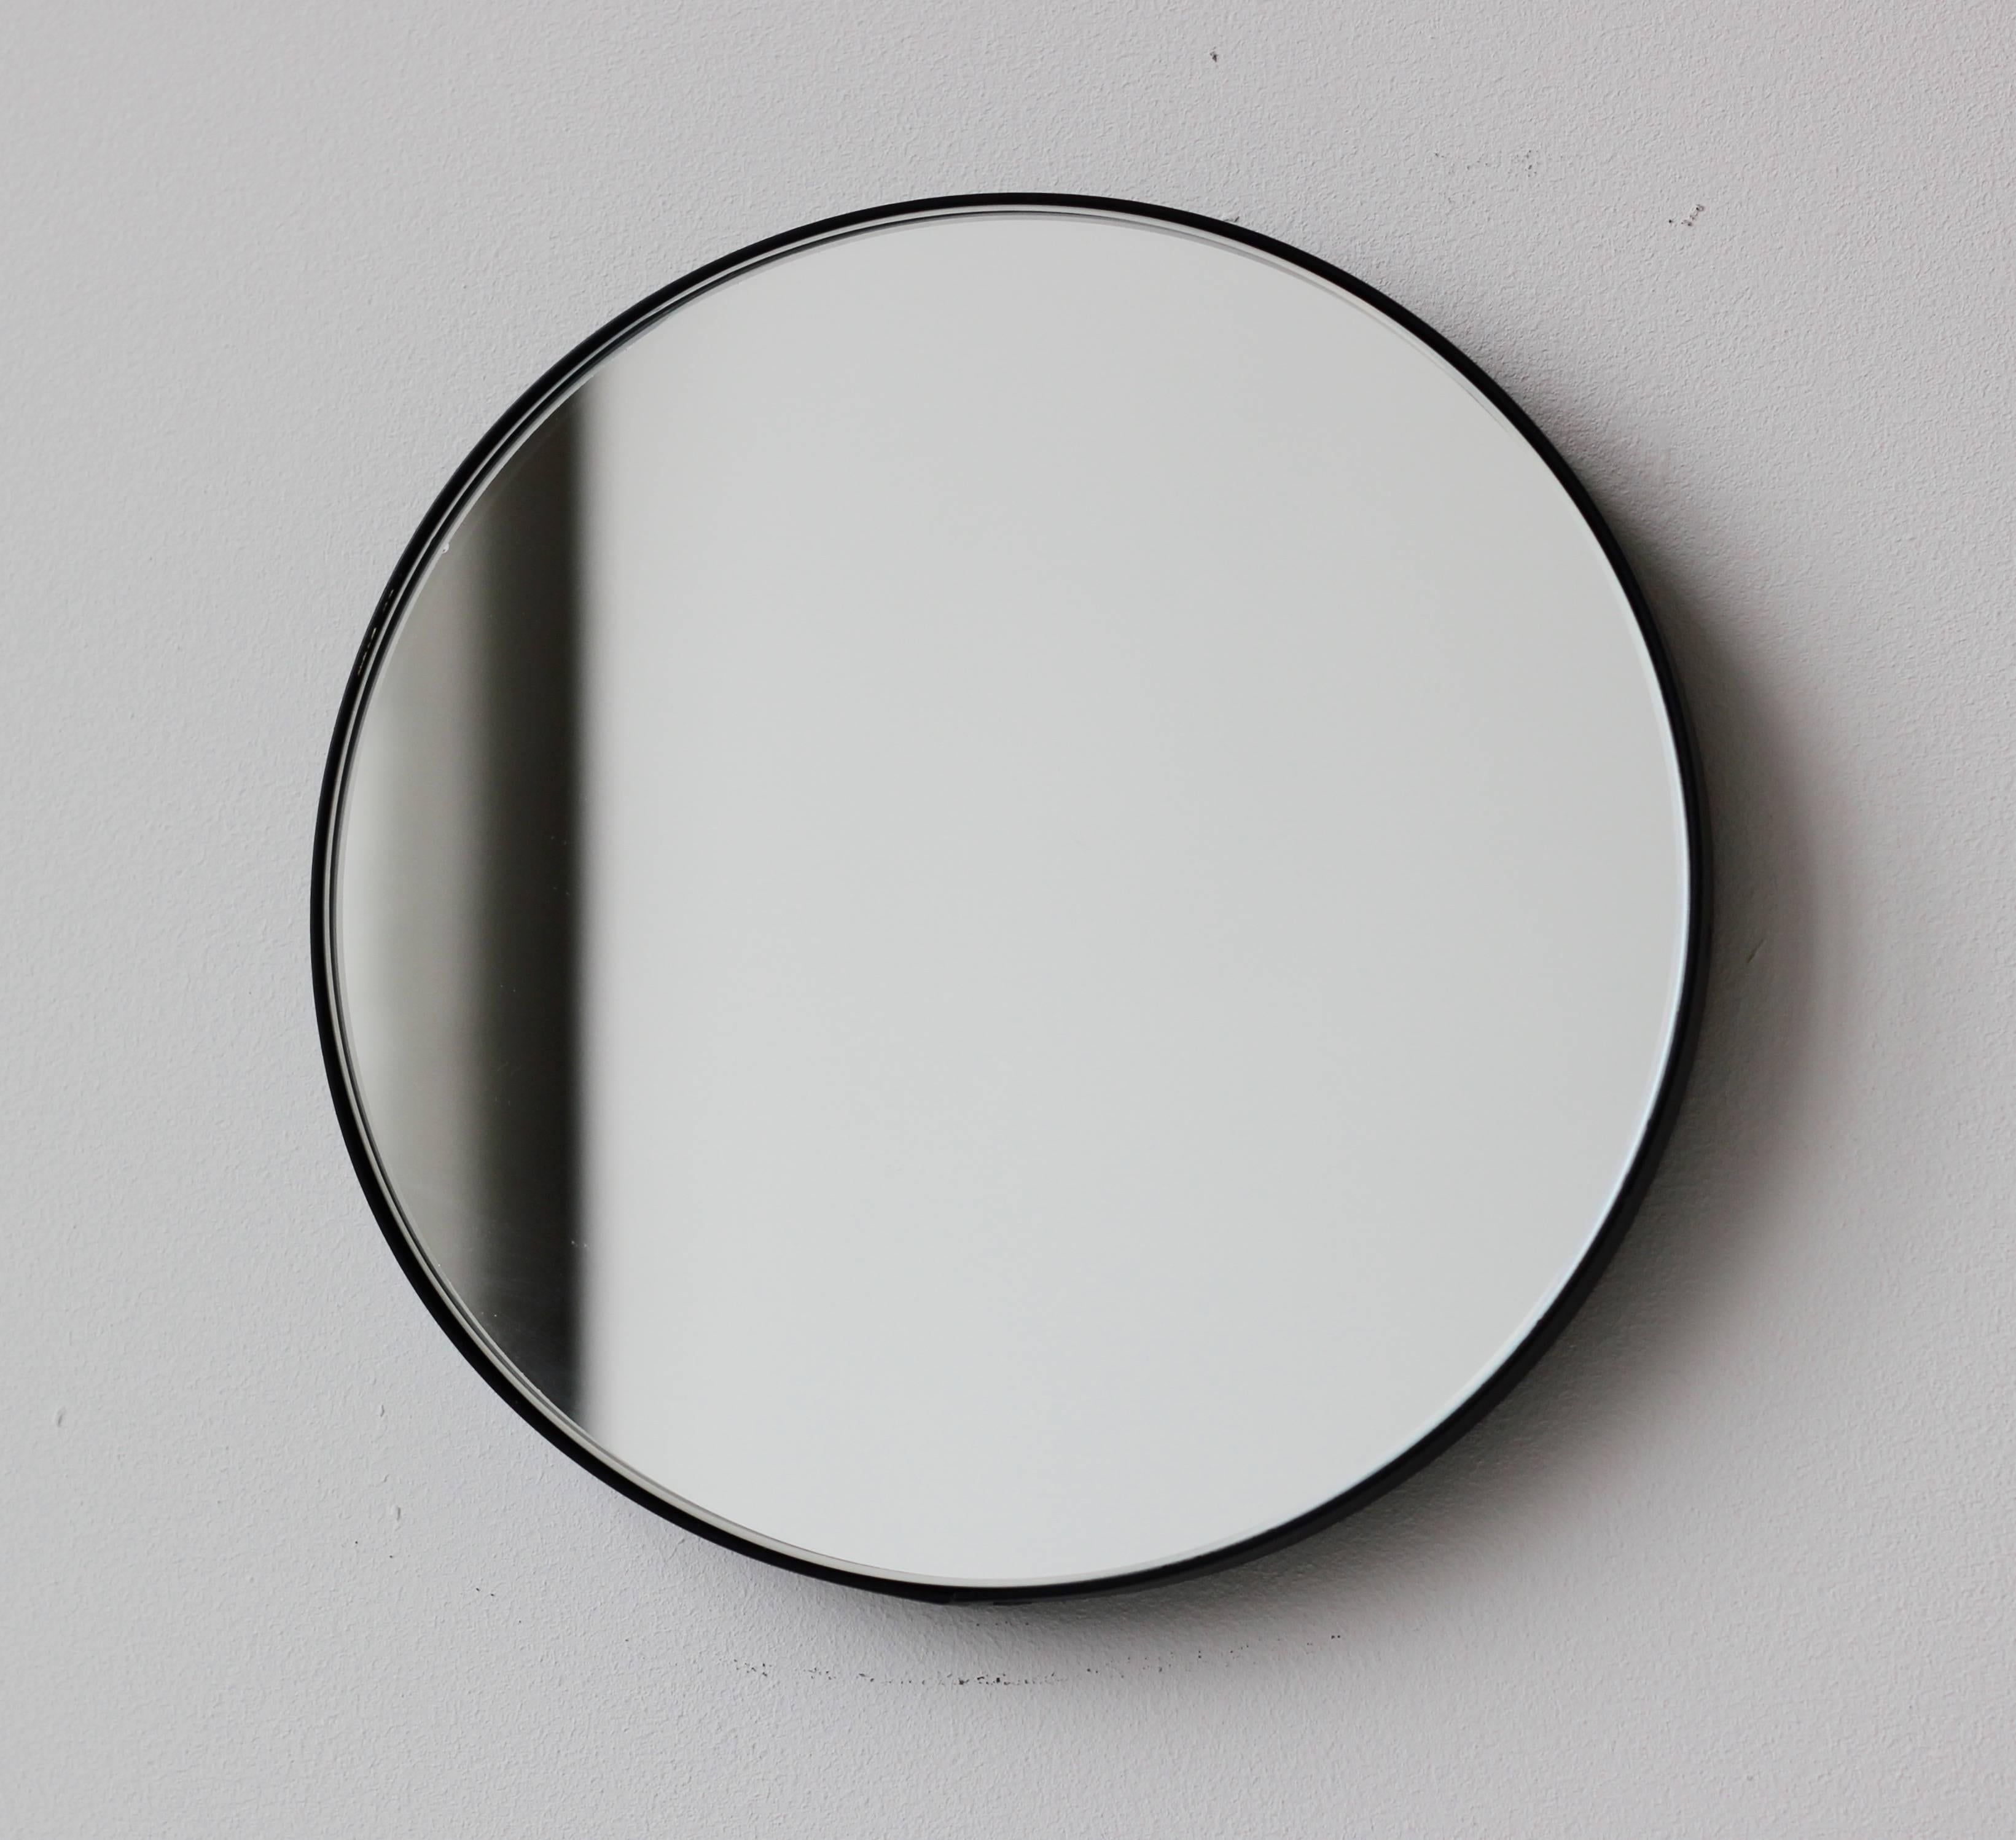 Minimalist Orbis™ round mirror with an elegant aluminium powder coated black frame. Designed and handcrafted in London, UK.

Medium, large and extra-large mirrors (60, 80 and 100cm) are fitted with an ingenious French cleat (split batten) system so